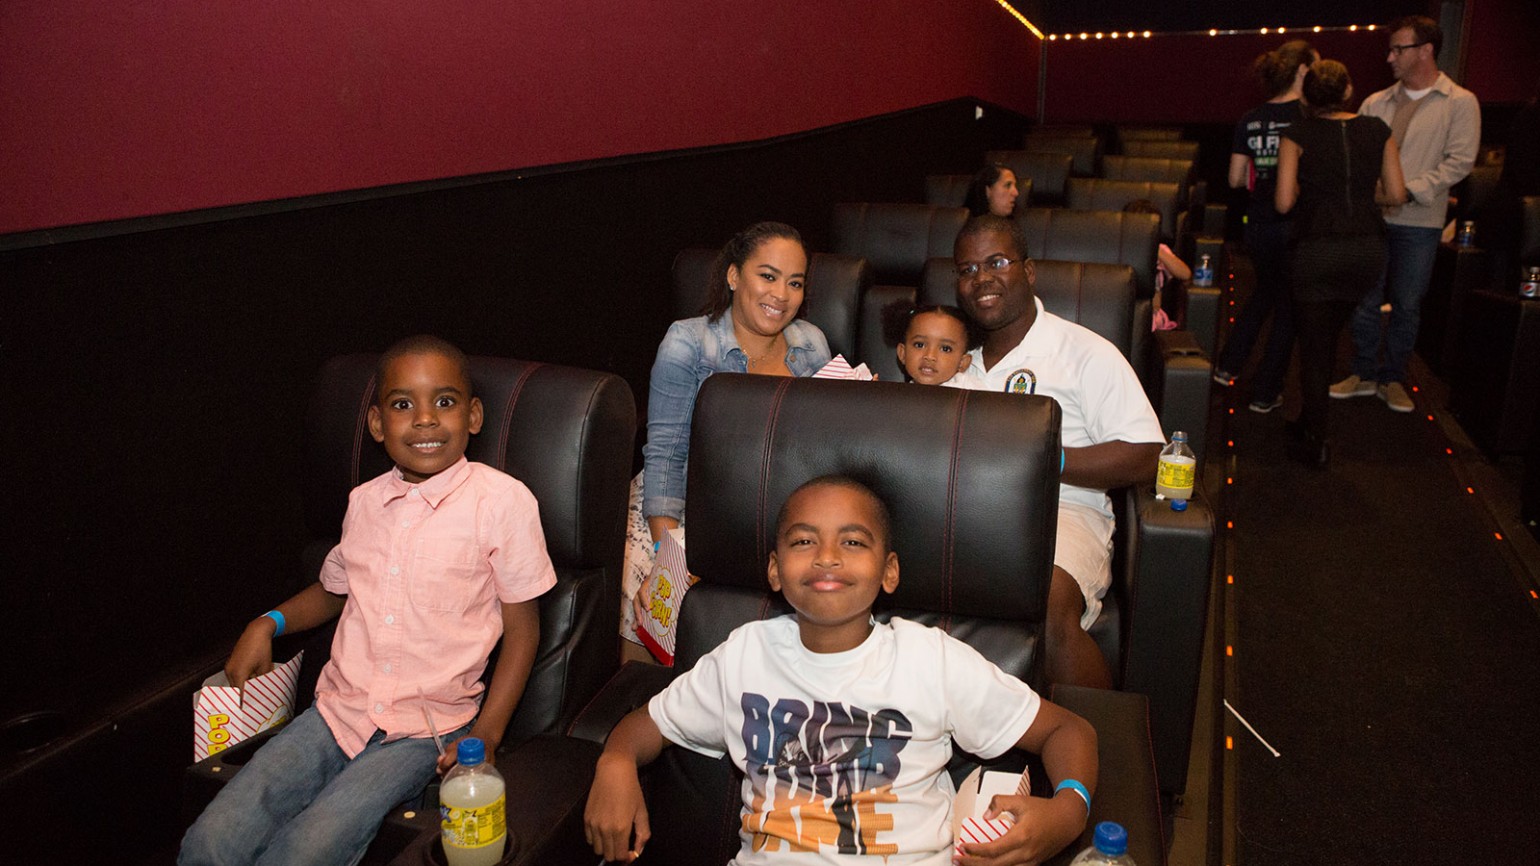 Attendees at our special preview screening of Storks - Family Movie Night 9/16